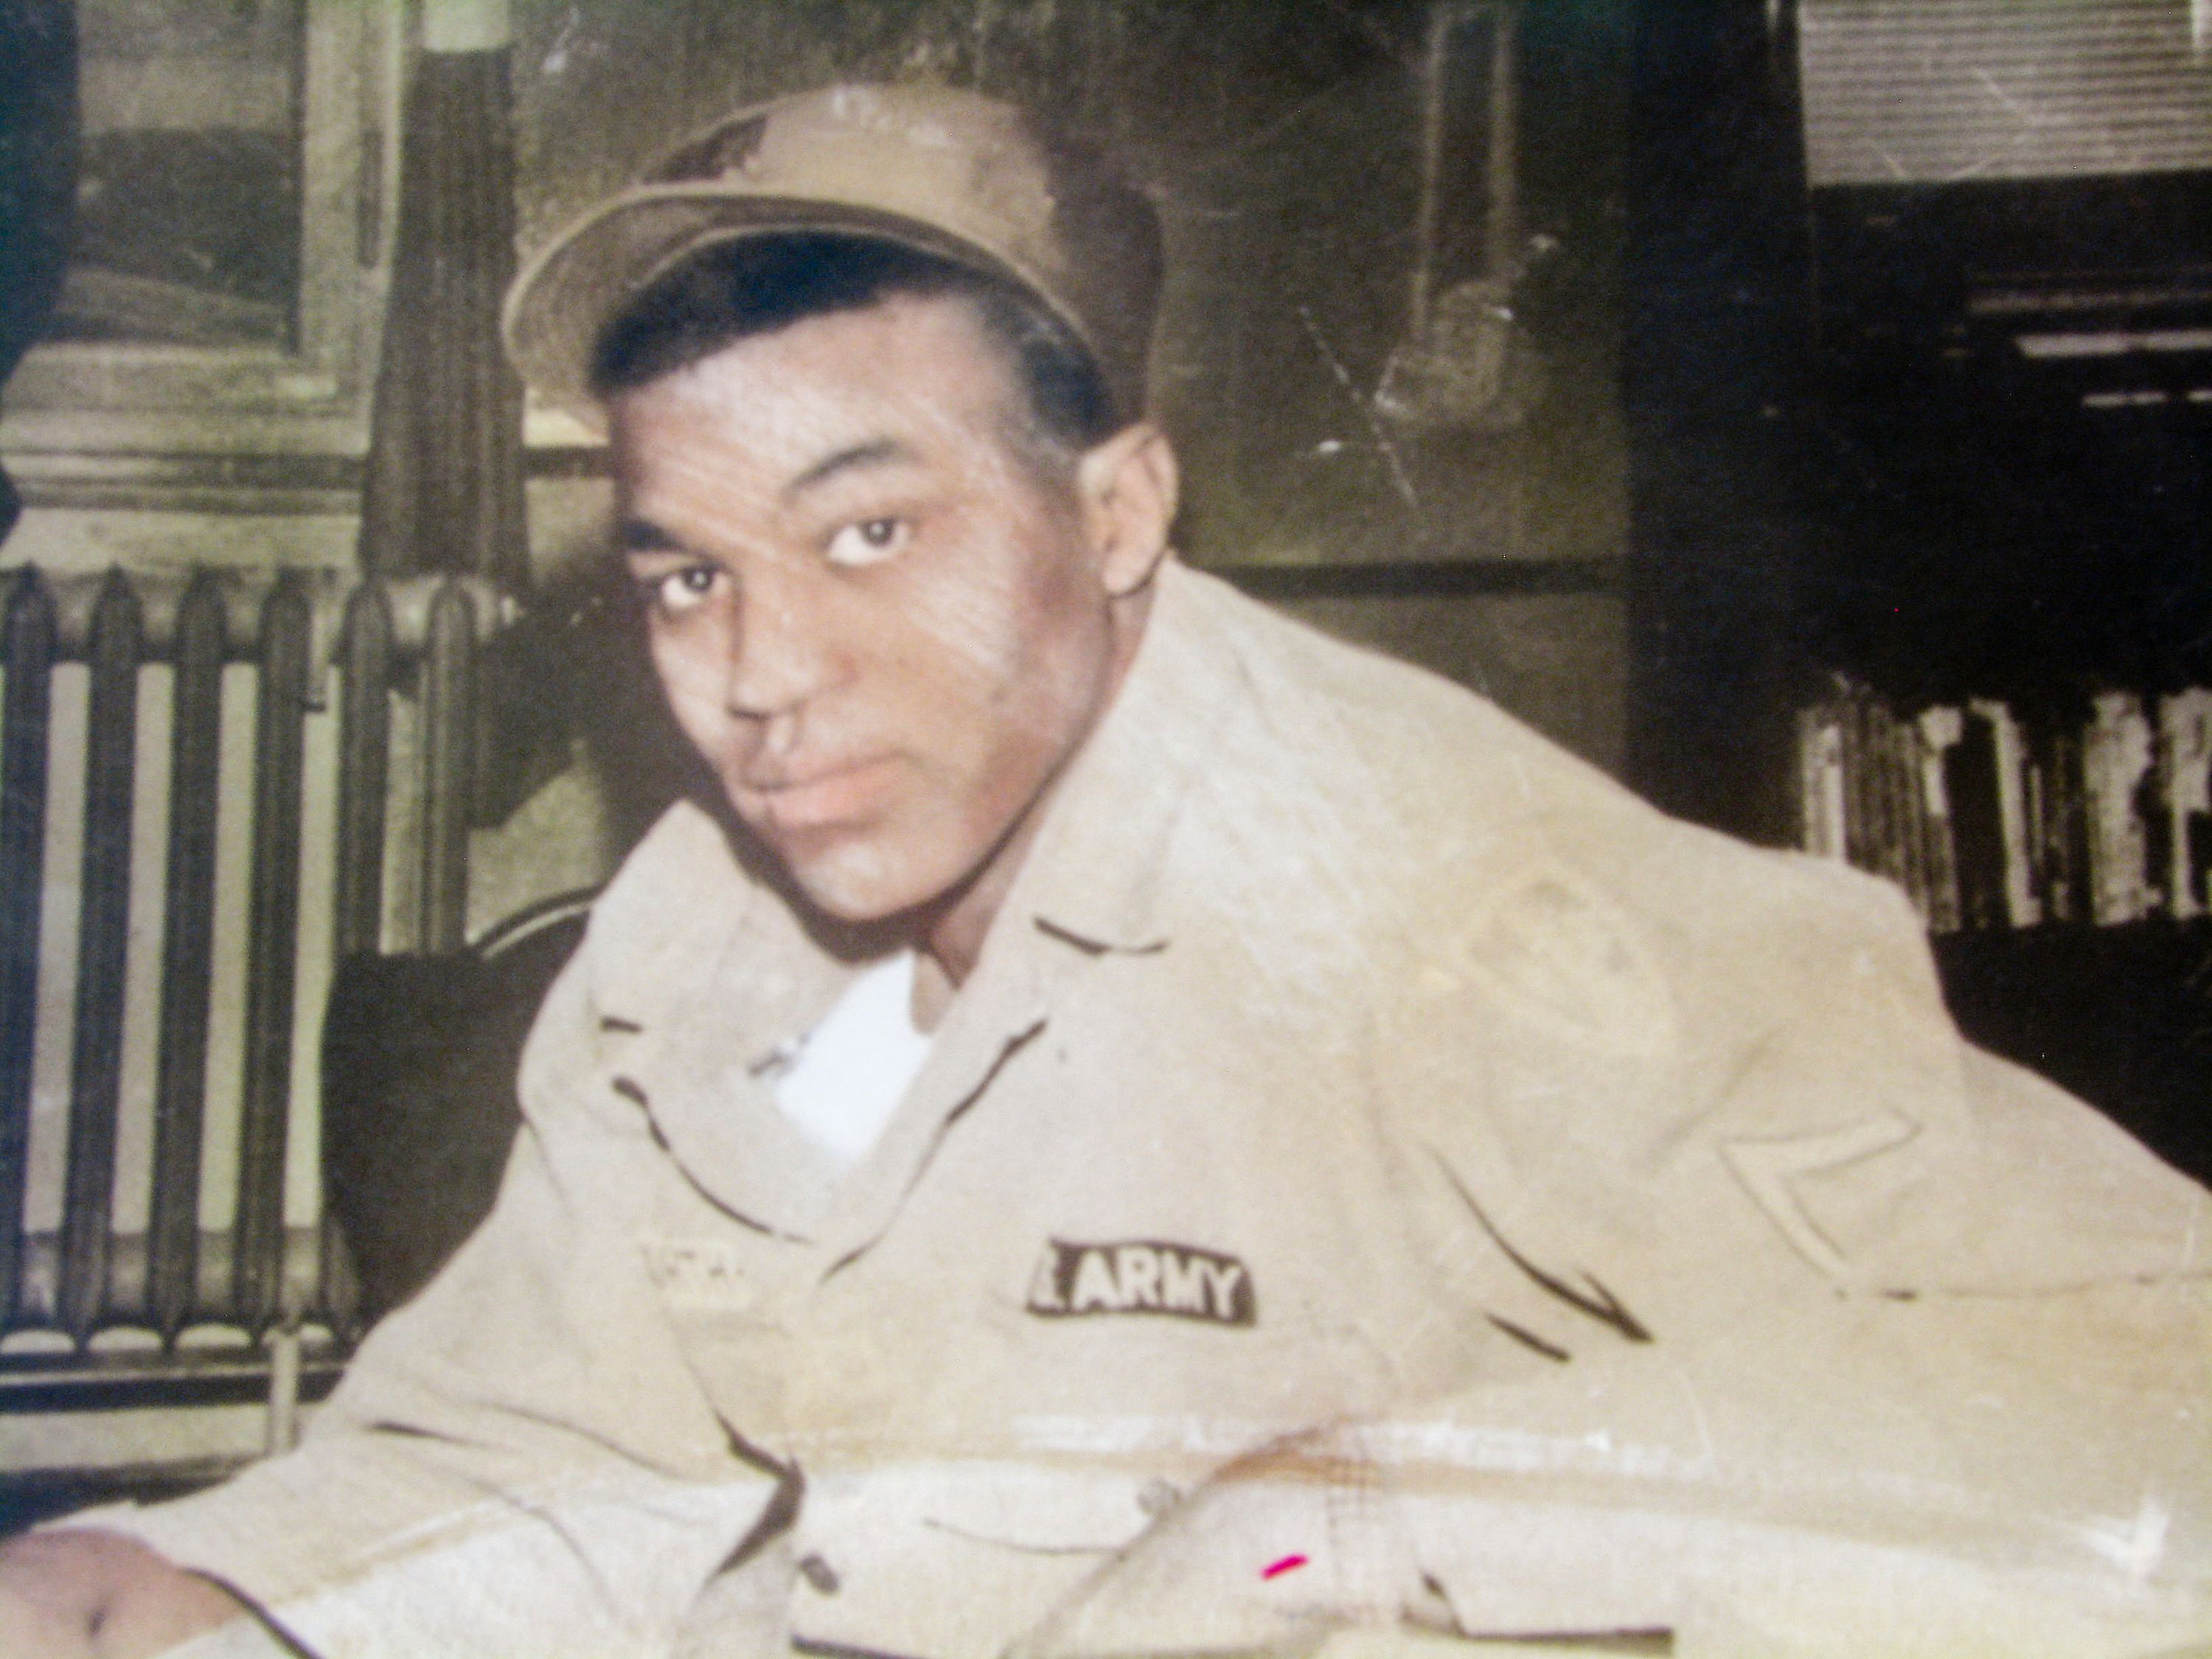 Roman Ducksworth in uniform. The Army corporal was shot to death by a white Mississippi police officer in 1962. Courtesy of Cordero Ducksworth and the Syracuse Cold Case Justice Initiative